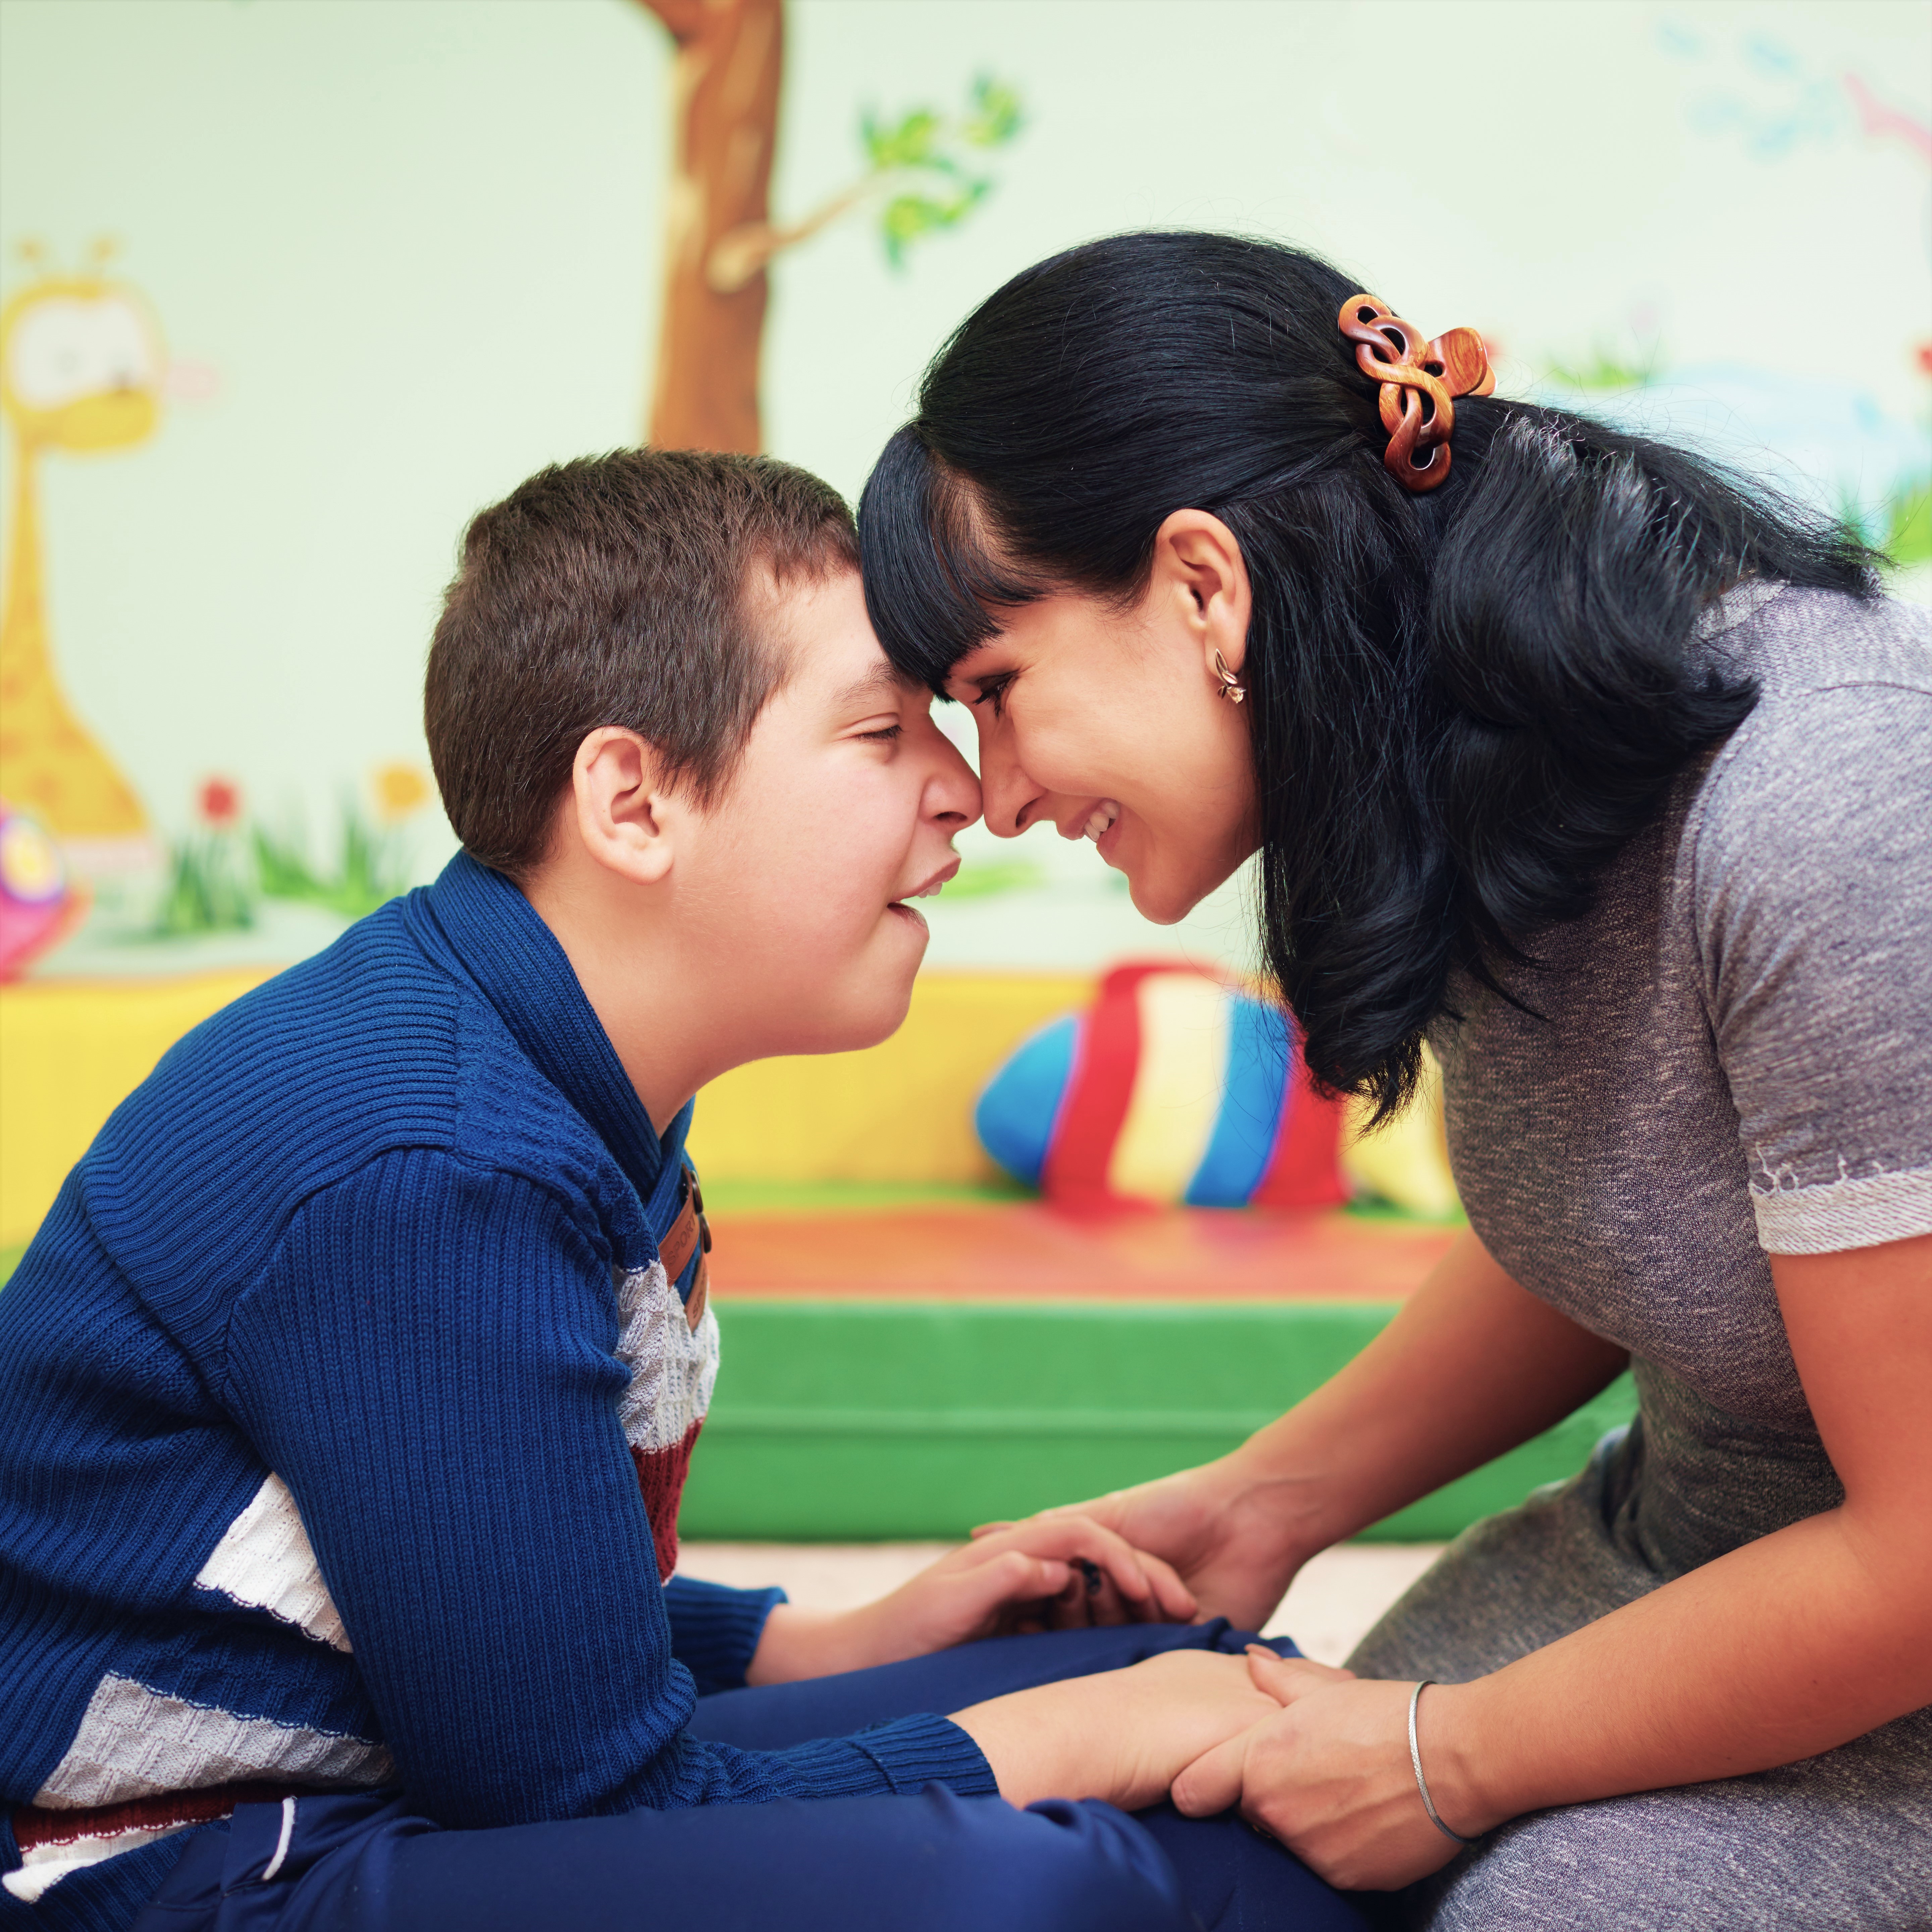 Child with cognitive disability touches his forehead to a woman's forehead. They are both smiling and seem very happy.